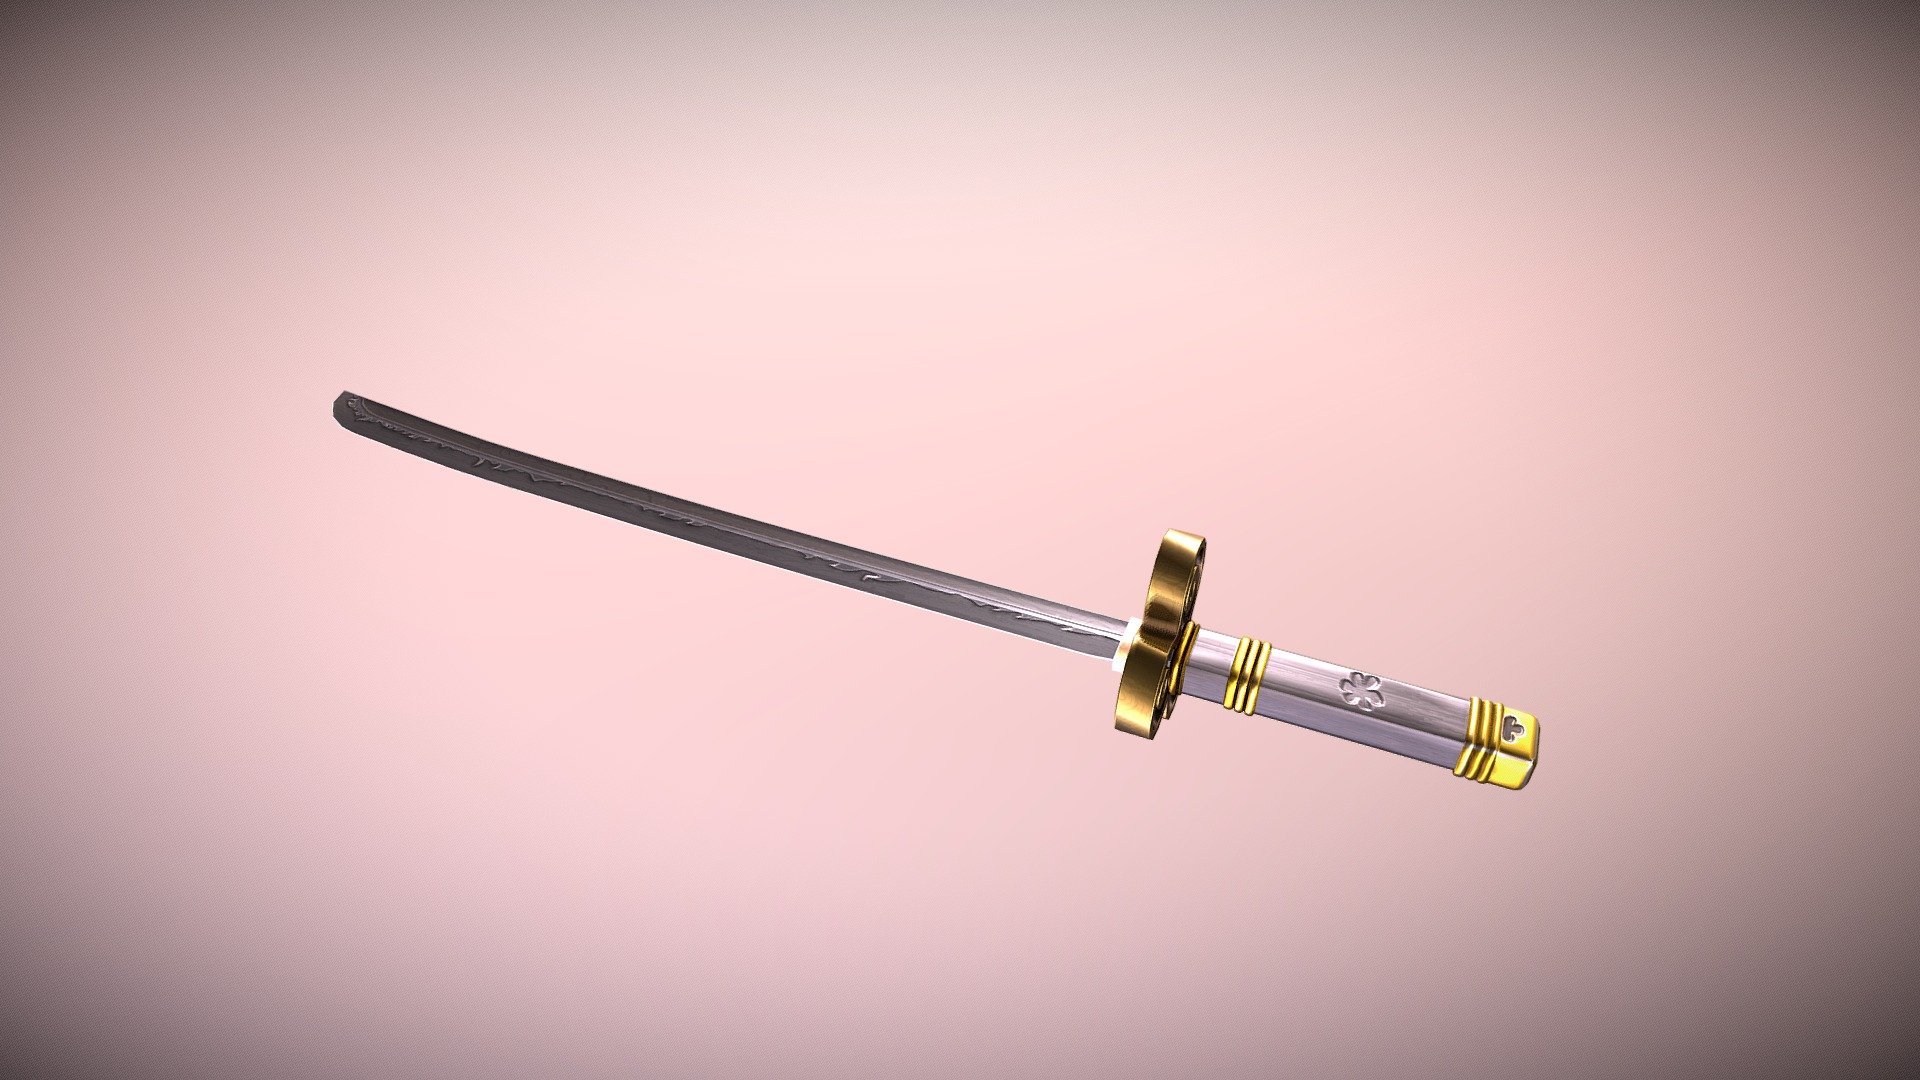 One piece is one of my favorite anime ever, I loved this sword design and it's power is incredible! - Enma - One piece Katana - 3D model by Bertran Evarini (@bertranevarini) 3d model